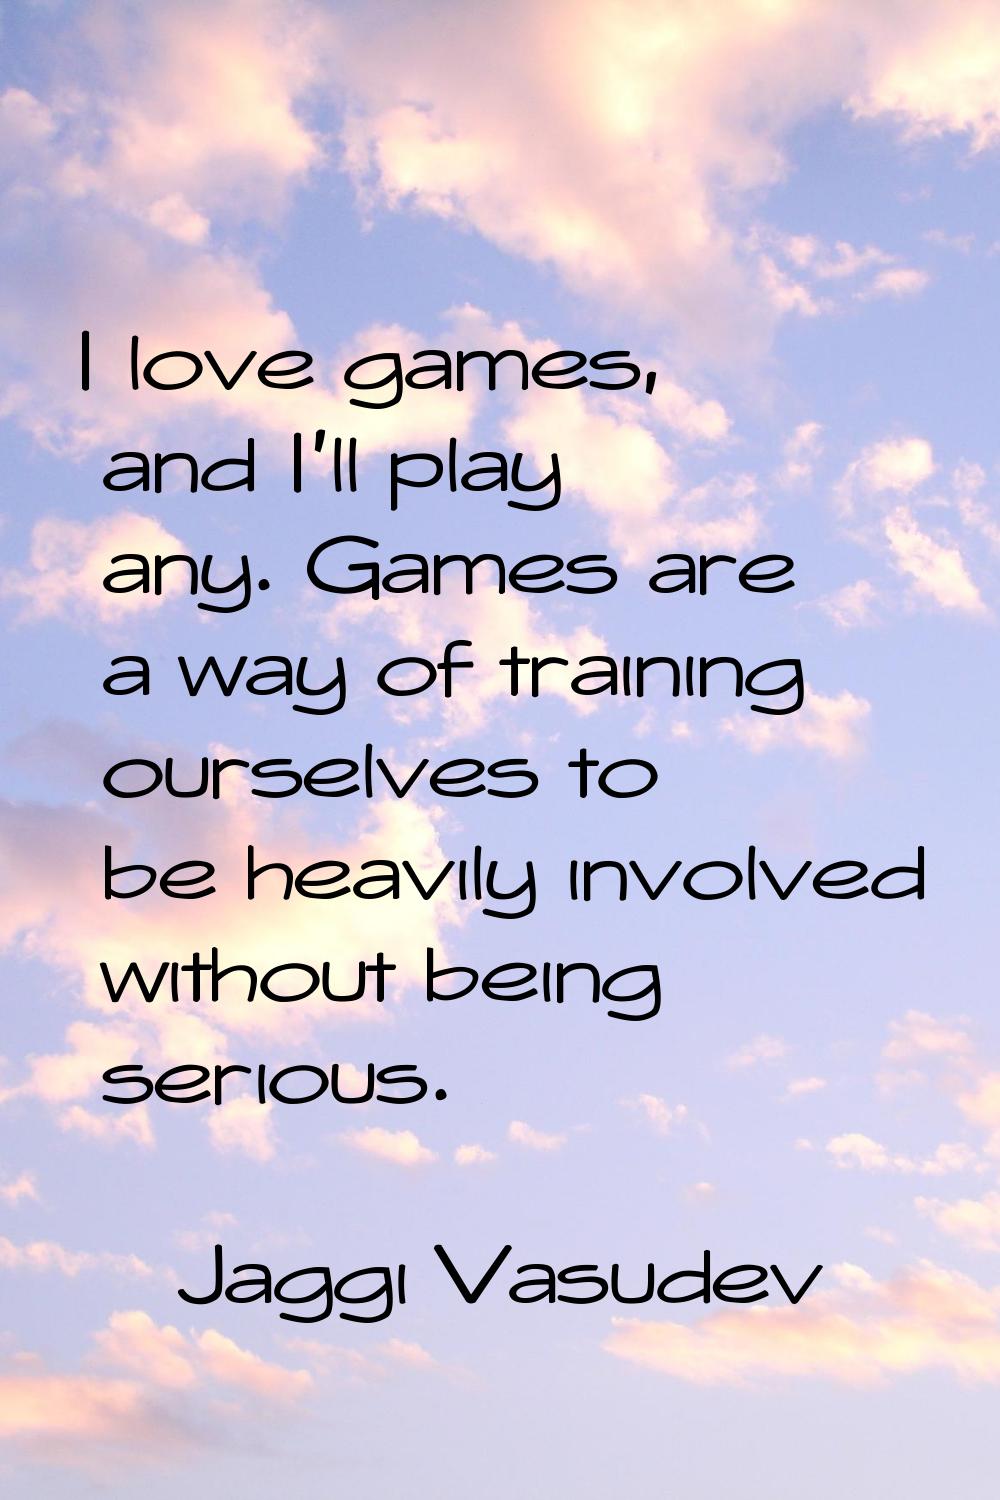 I love games, and I'll play any. Games are a way of training ourselves to be heavily involved witho